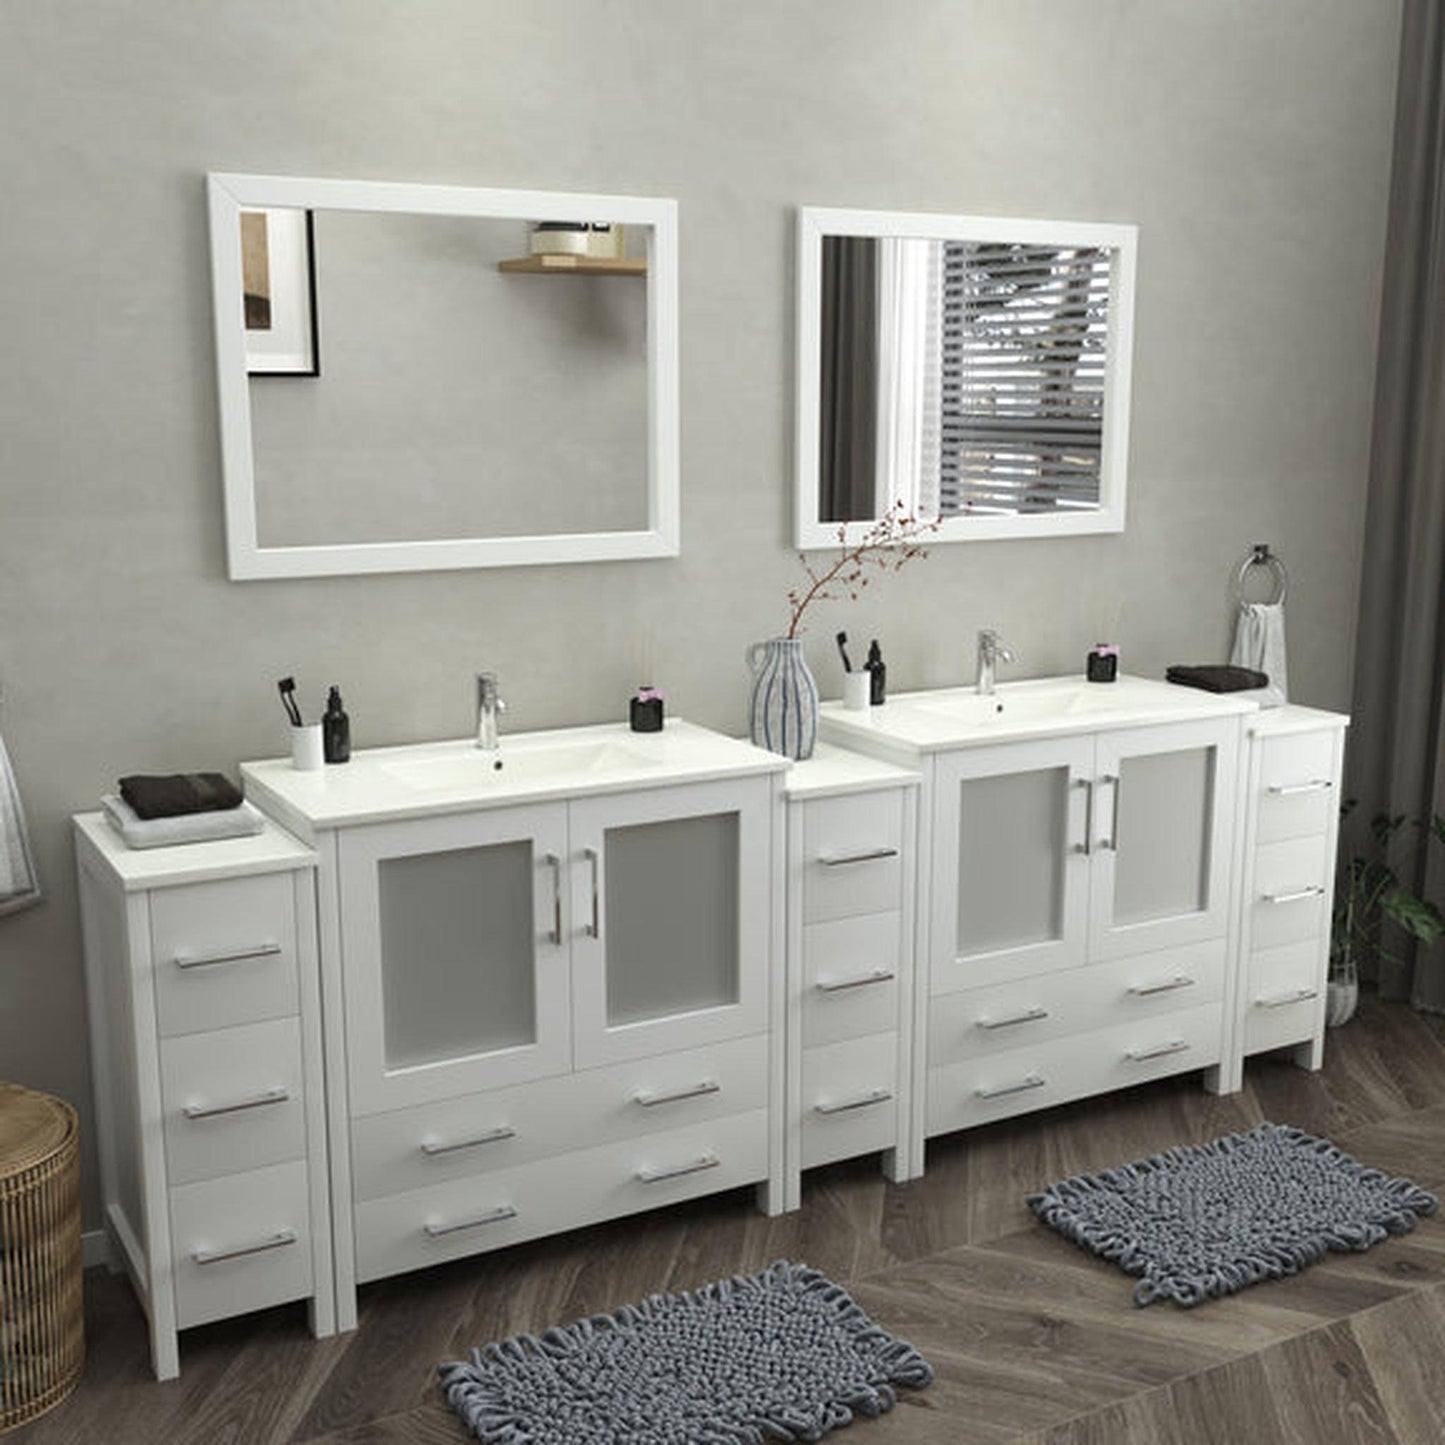 Vanity Art Brescia 108" Double White Freestanding Modern Bathroom Vanity Set With Integrated Ceramic Sink, 2 Shelves, 13 Dovetail Drawers and 2 Mirrors